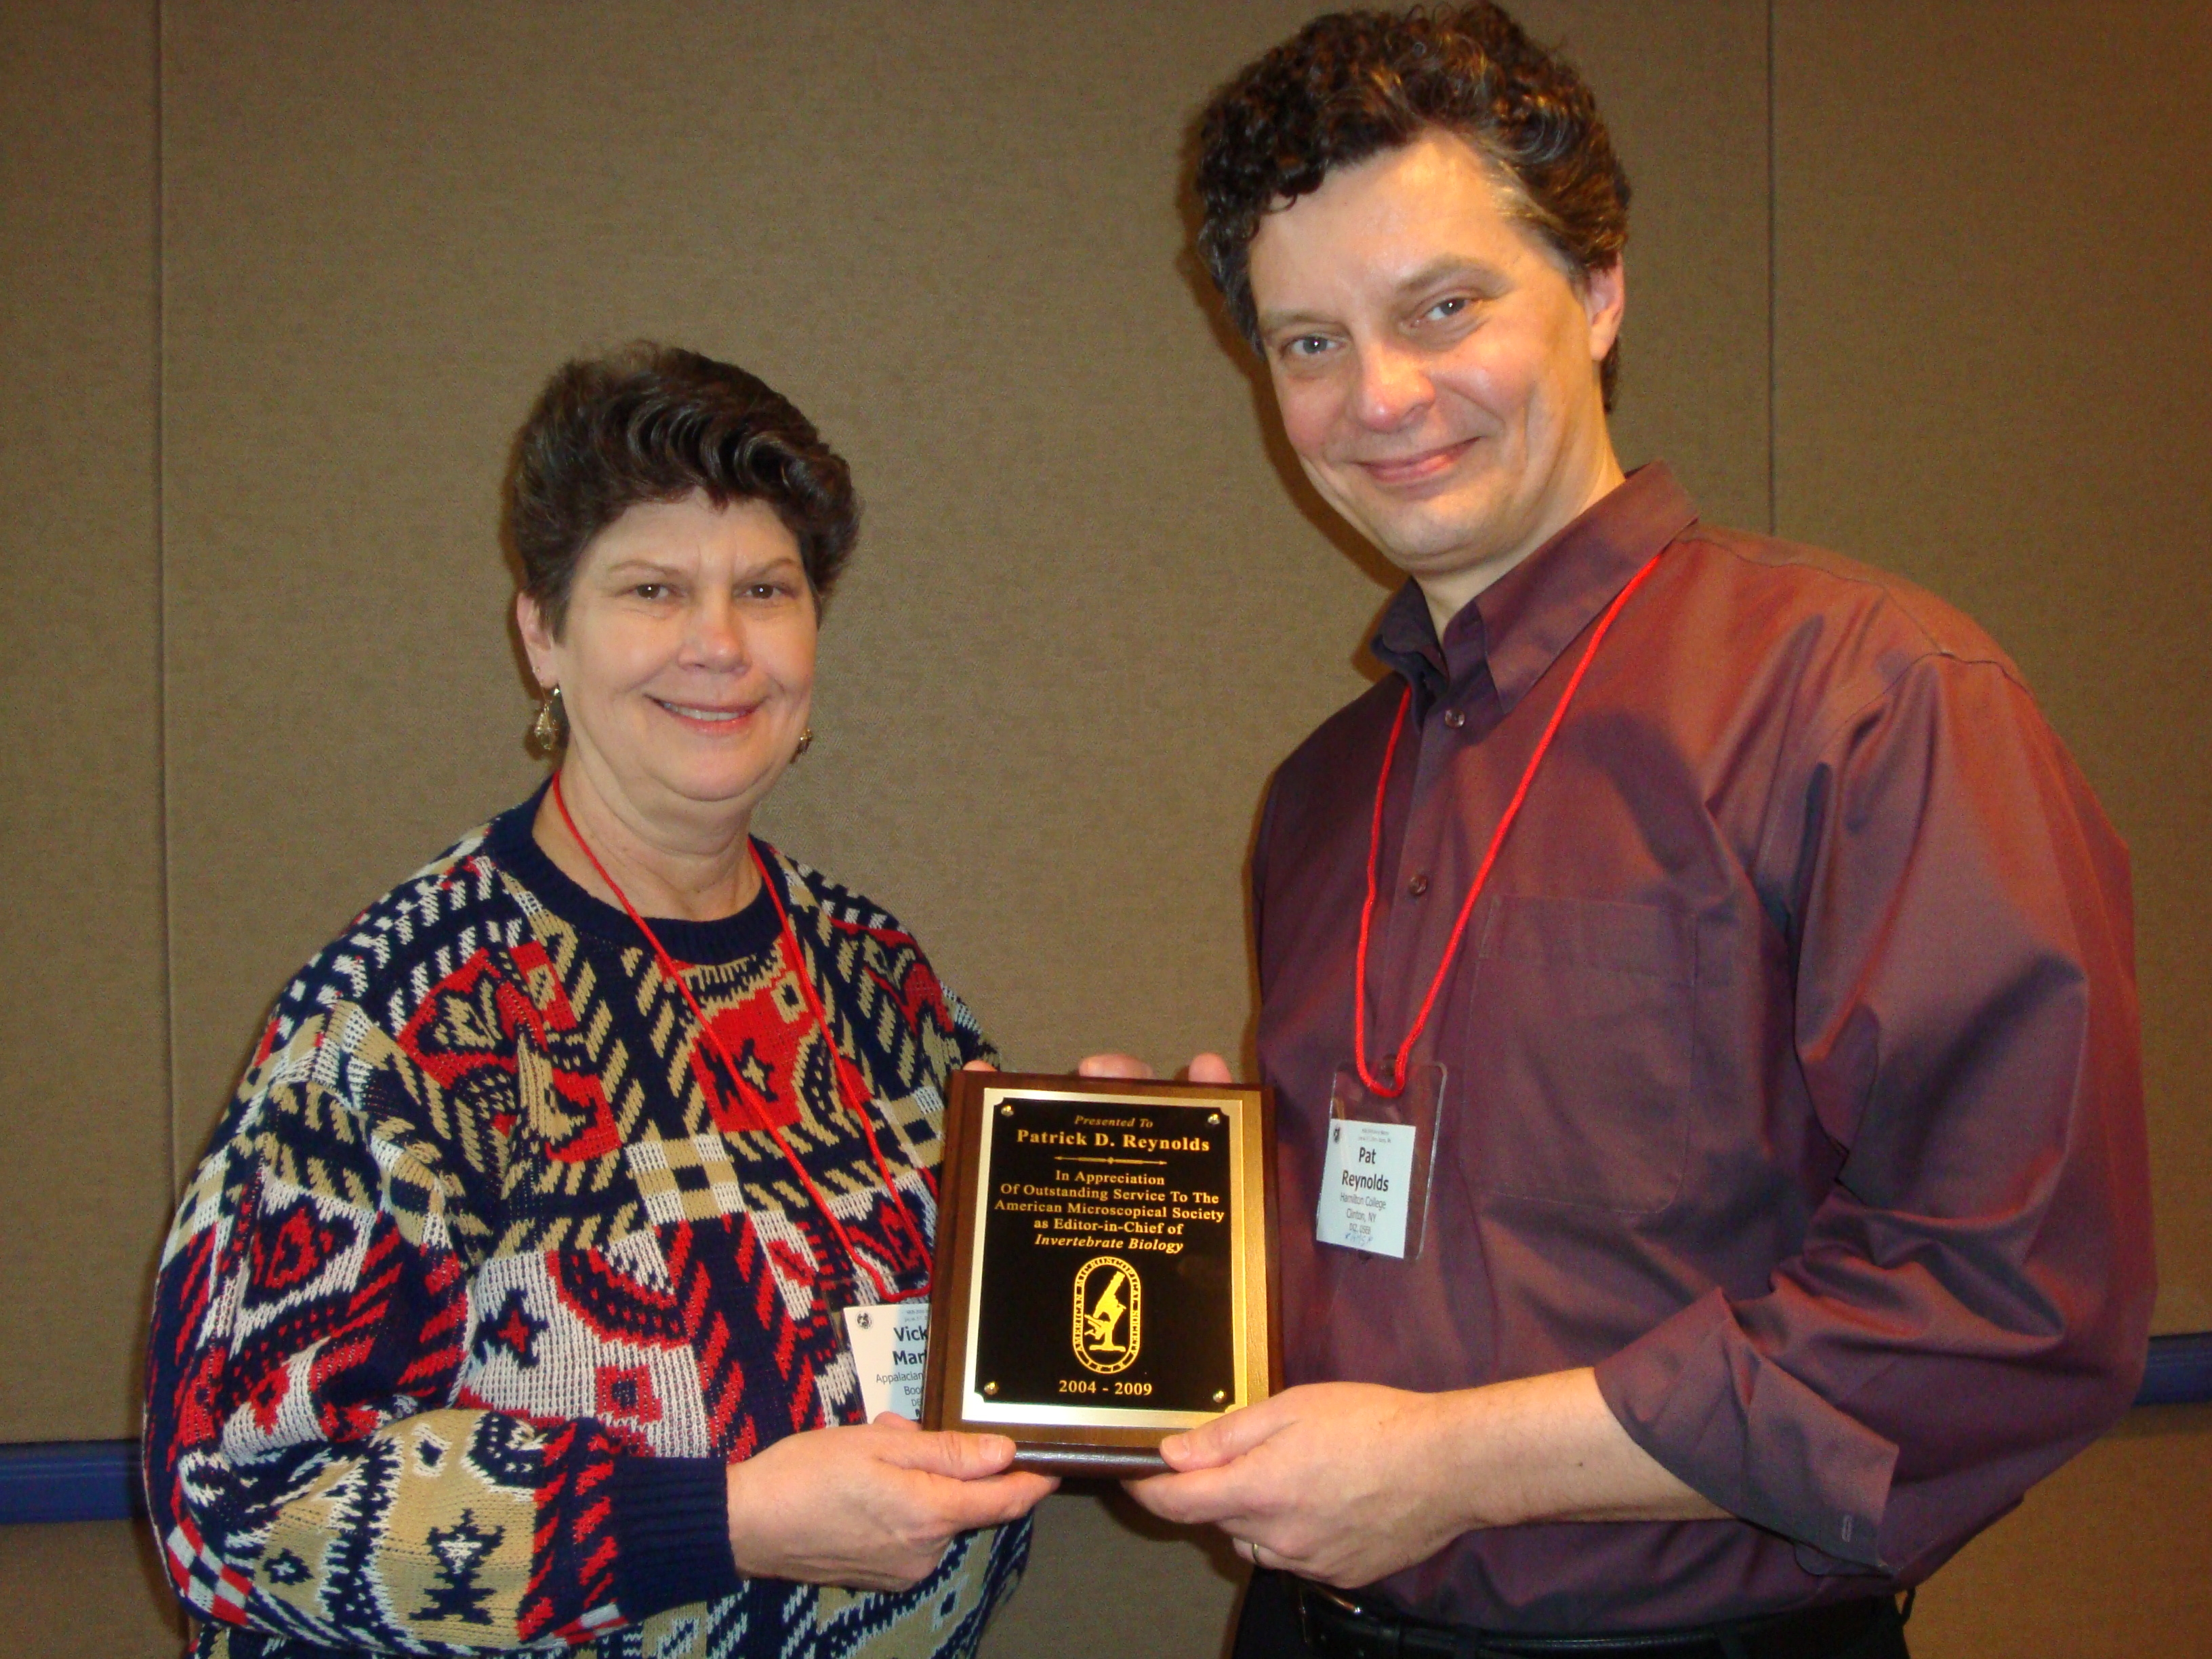 AMS president Vicki Martin presents Pat Reynolds with a plaque at the society's annual meeting.